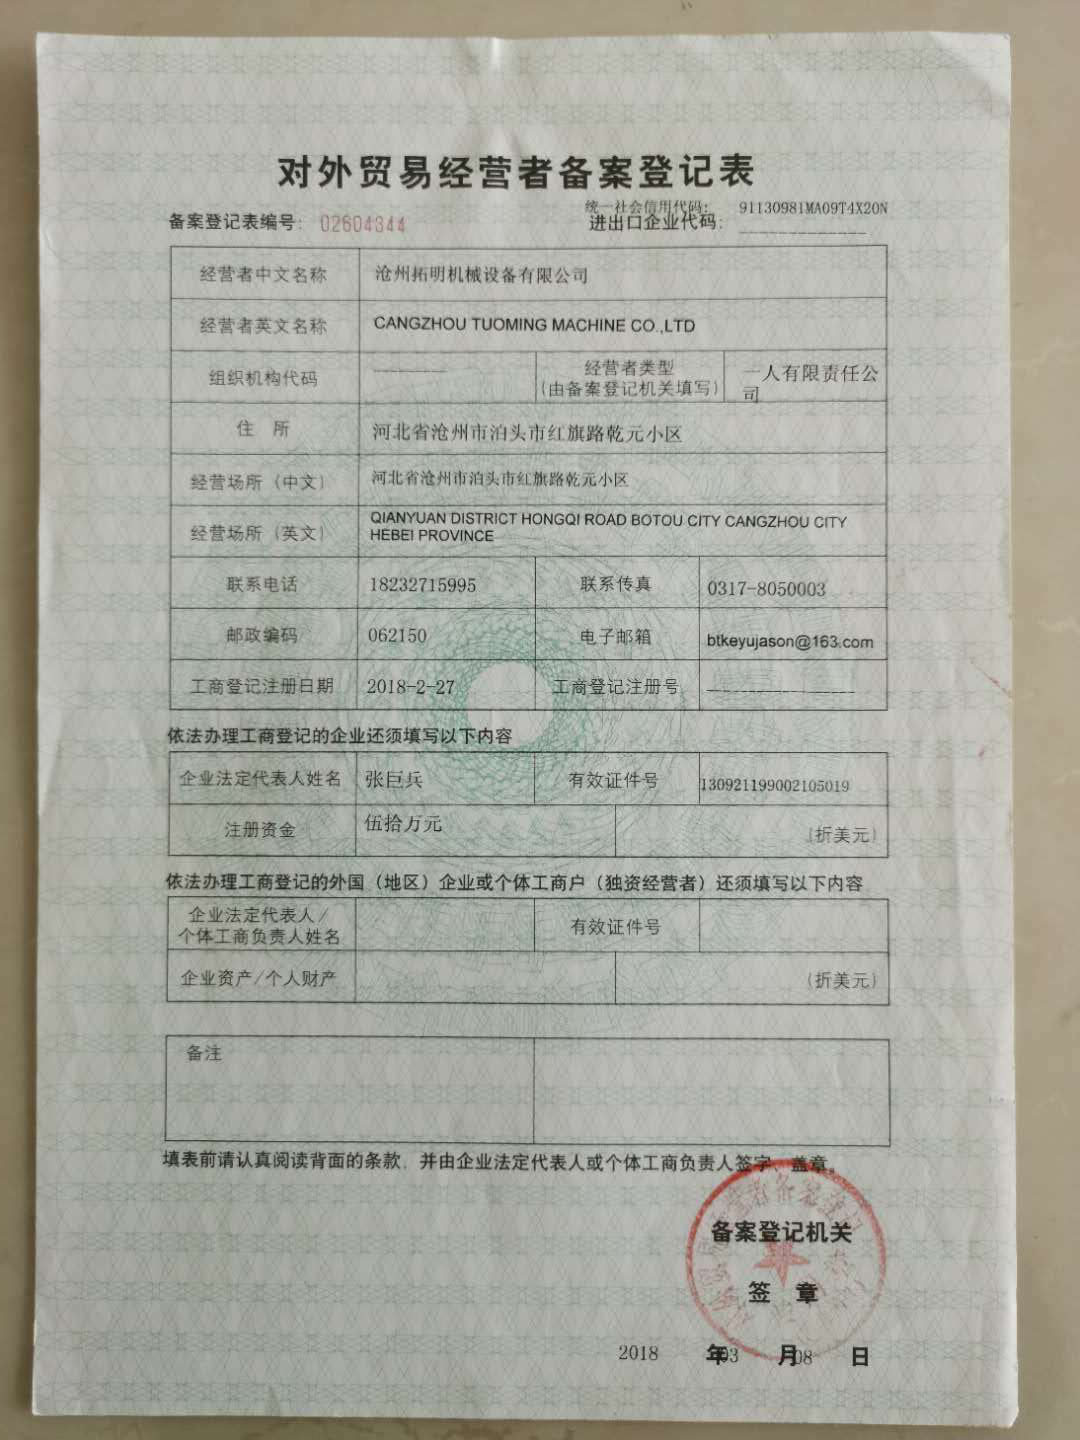 Chine cangzhou tuoming machine co.,ltd Certifications